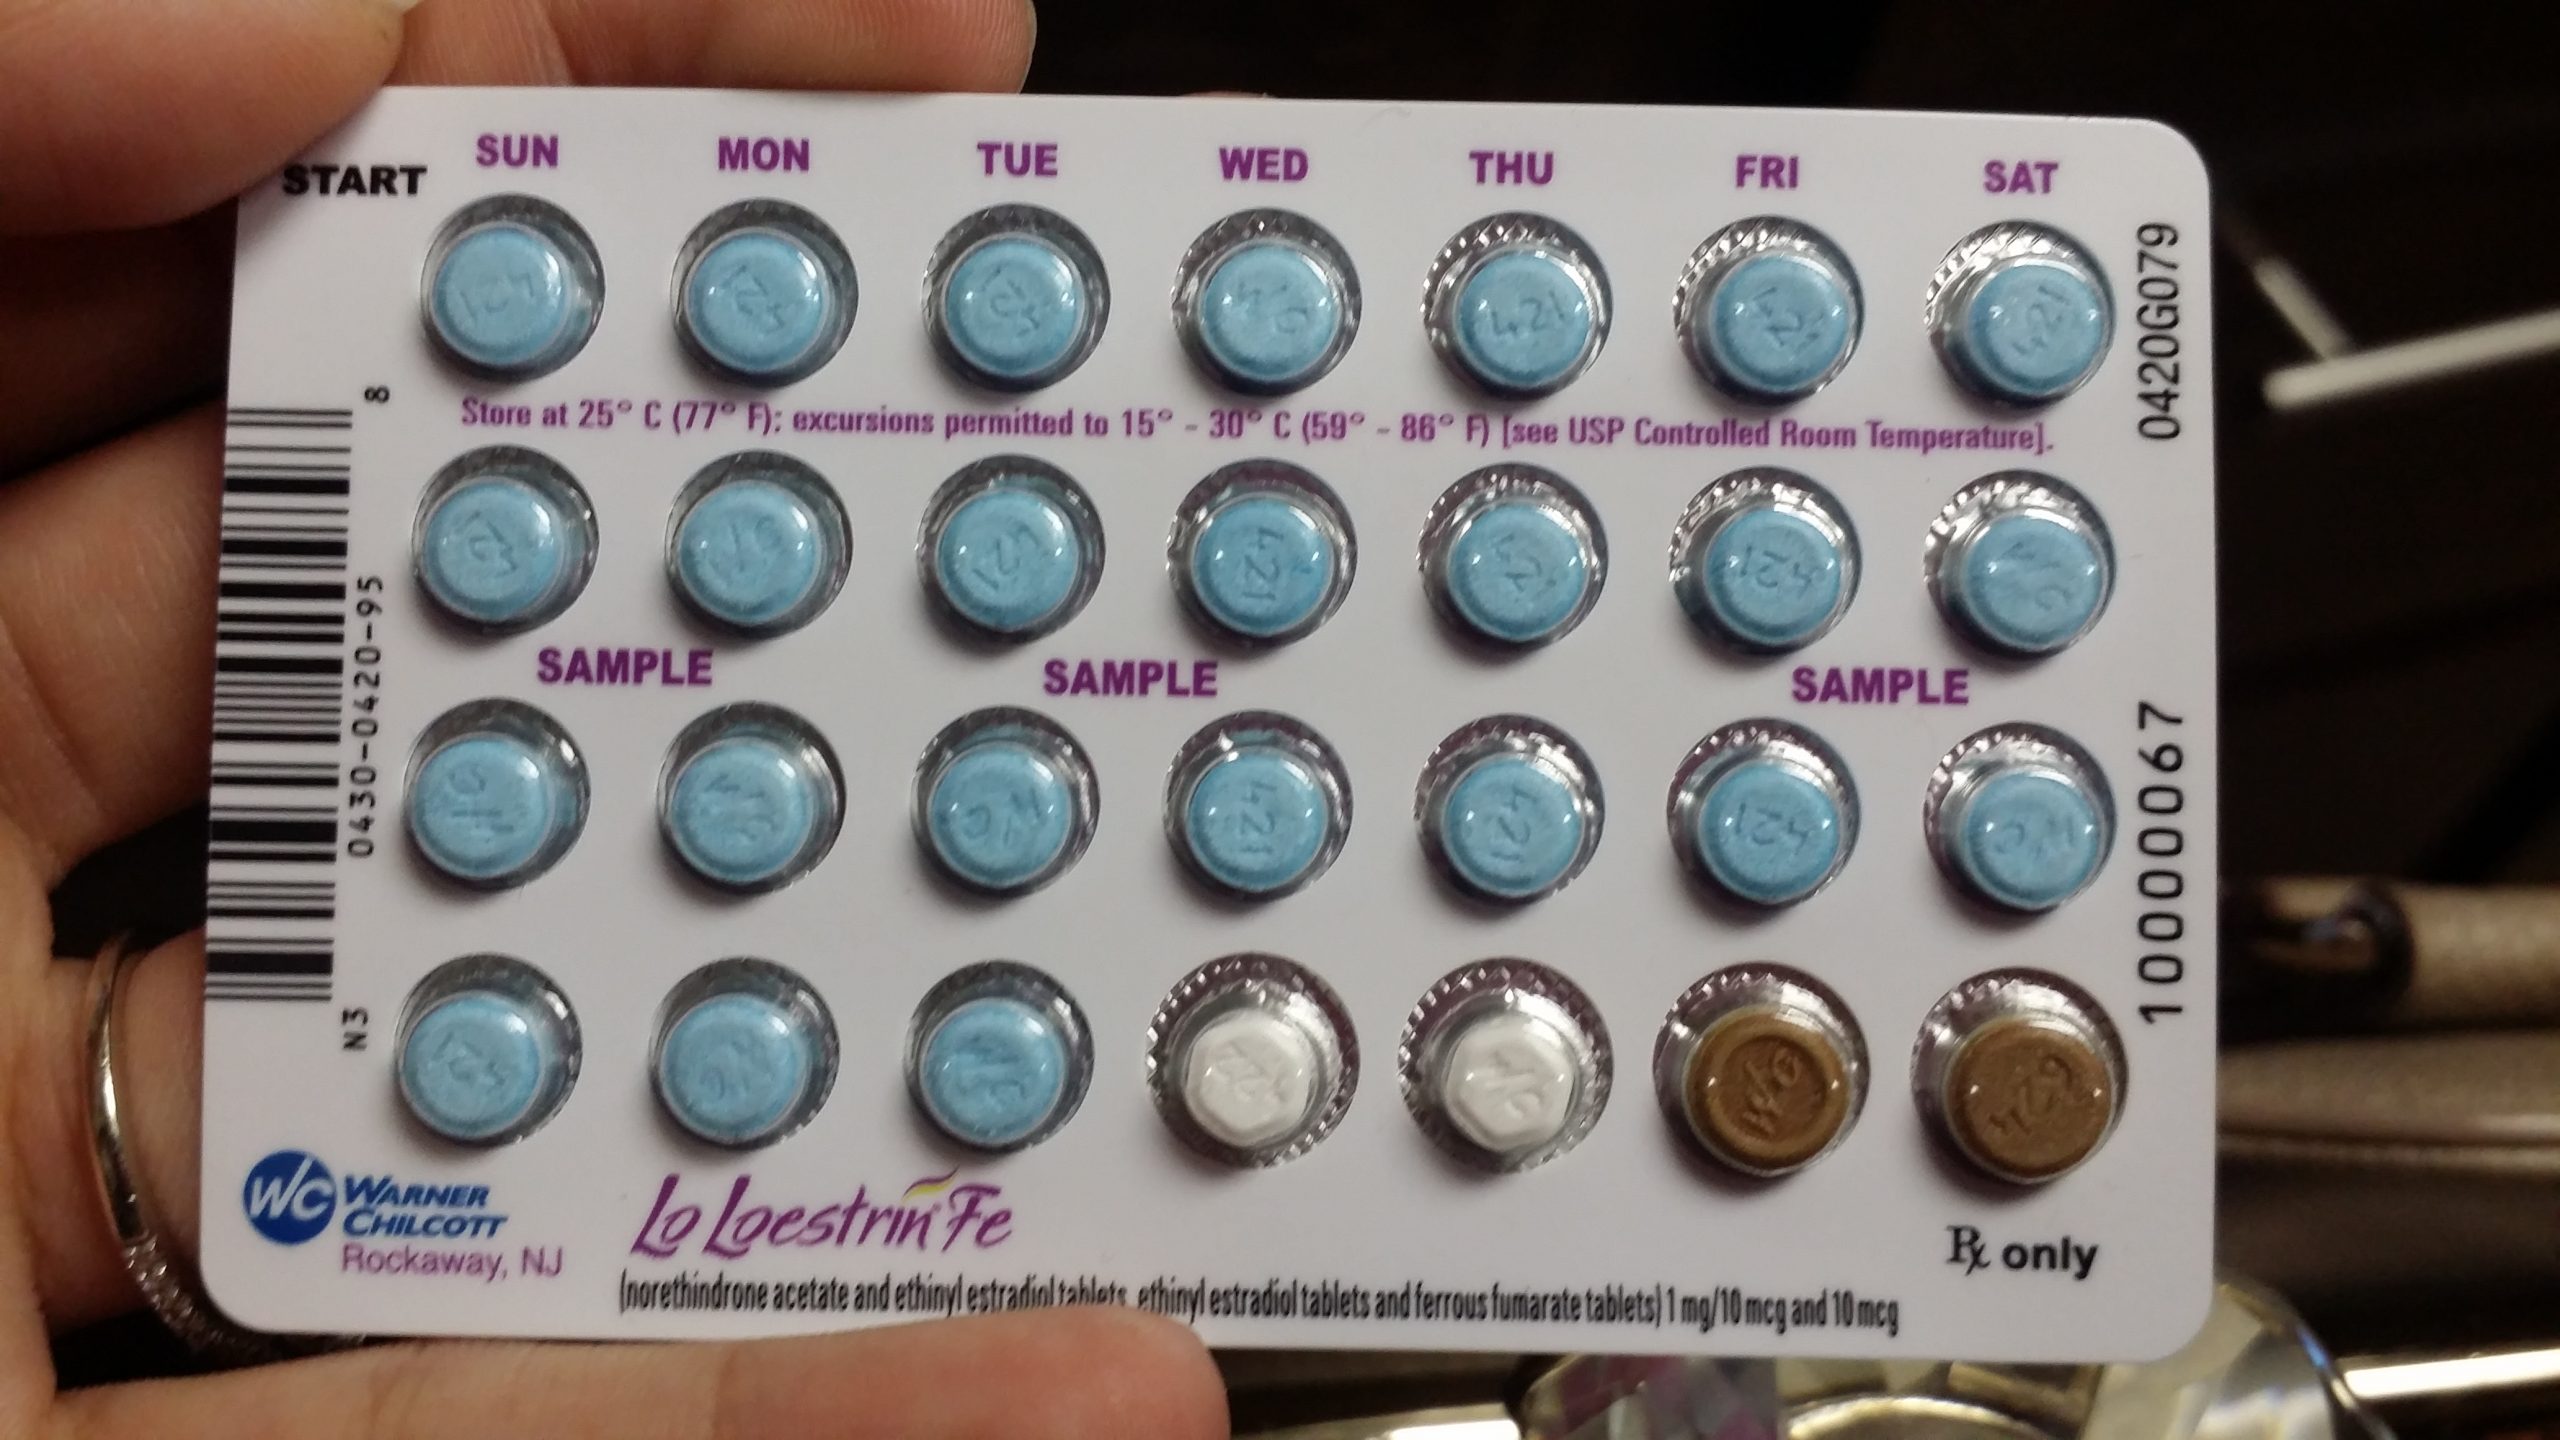 Birth control question. New at this. Lo loestrin fe? Help ...